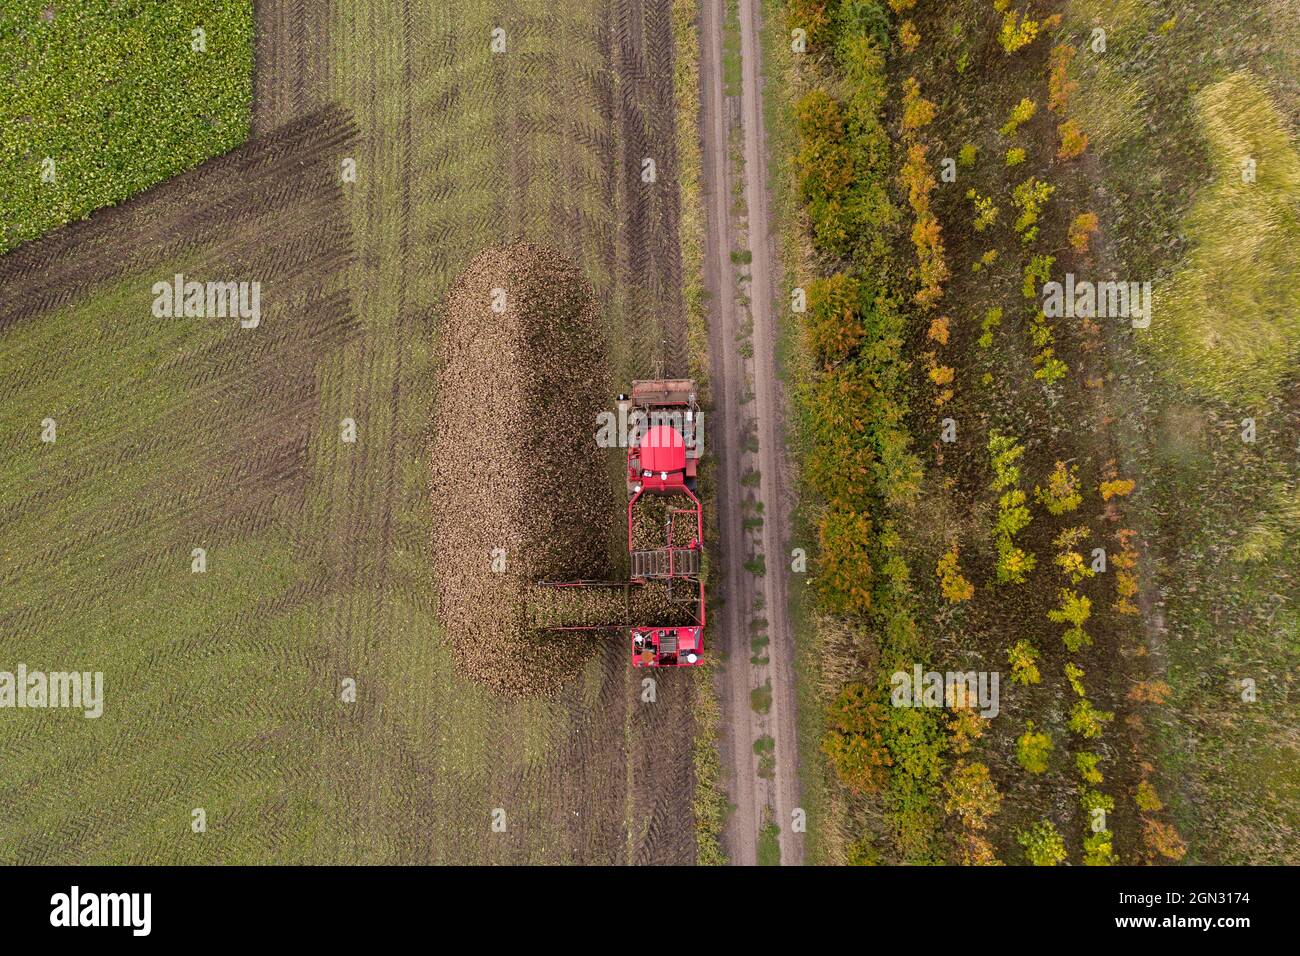 Combine harvester harvests sugar beet on the field. Aerial view  Stock Photo